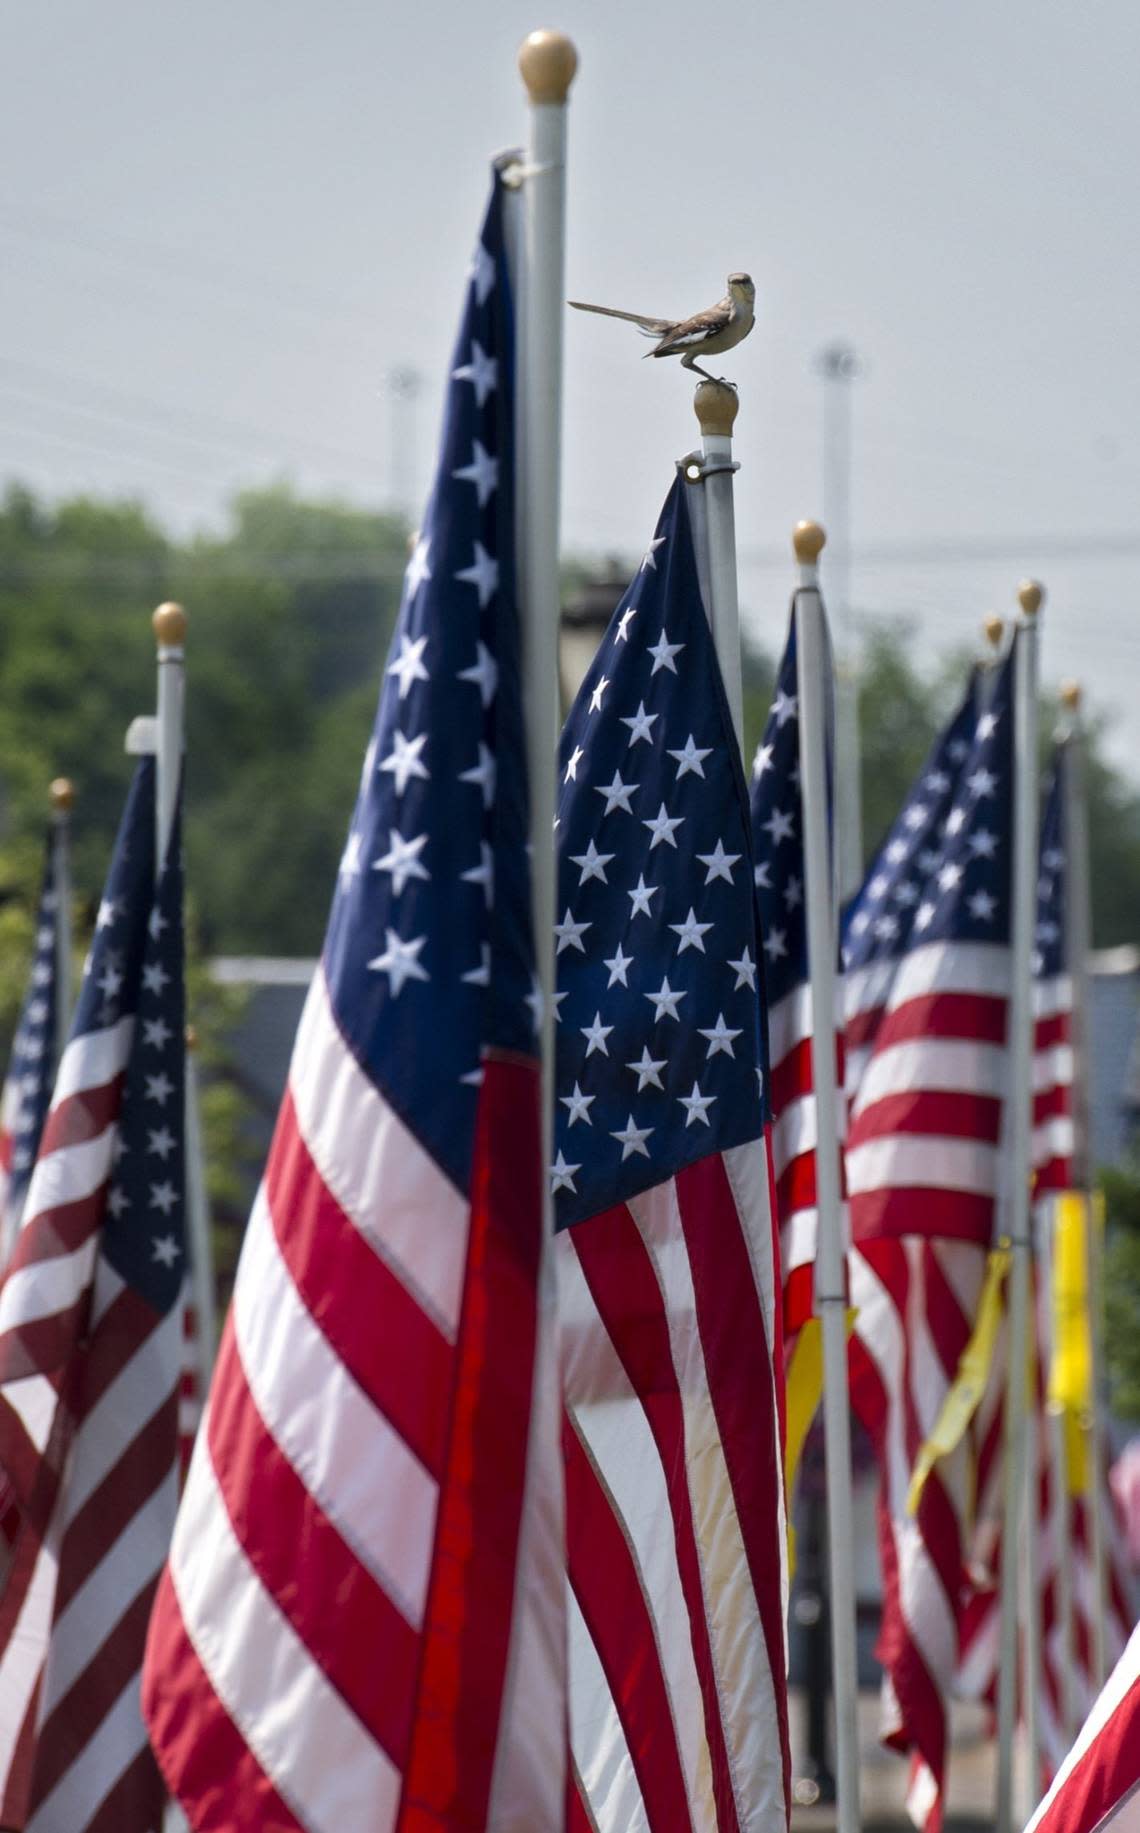 Flags 4 Freedom will be on display July 2-9 in Downtown Merriam.